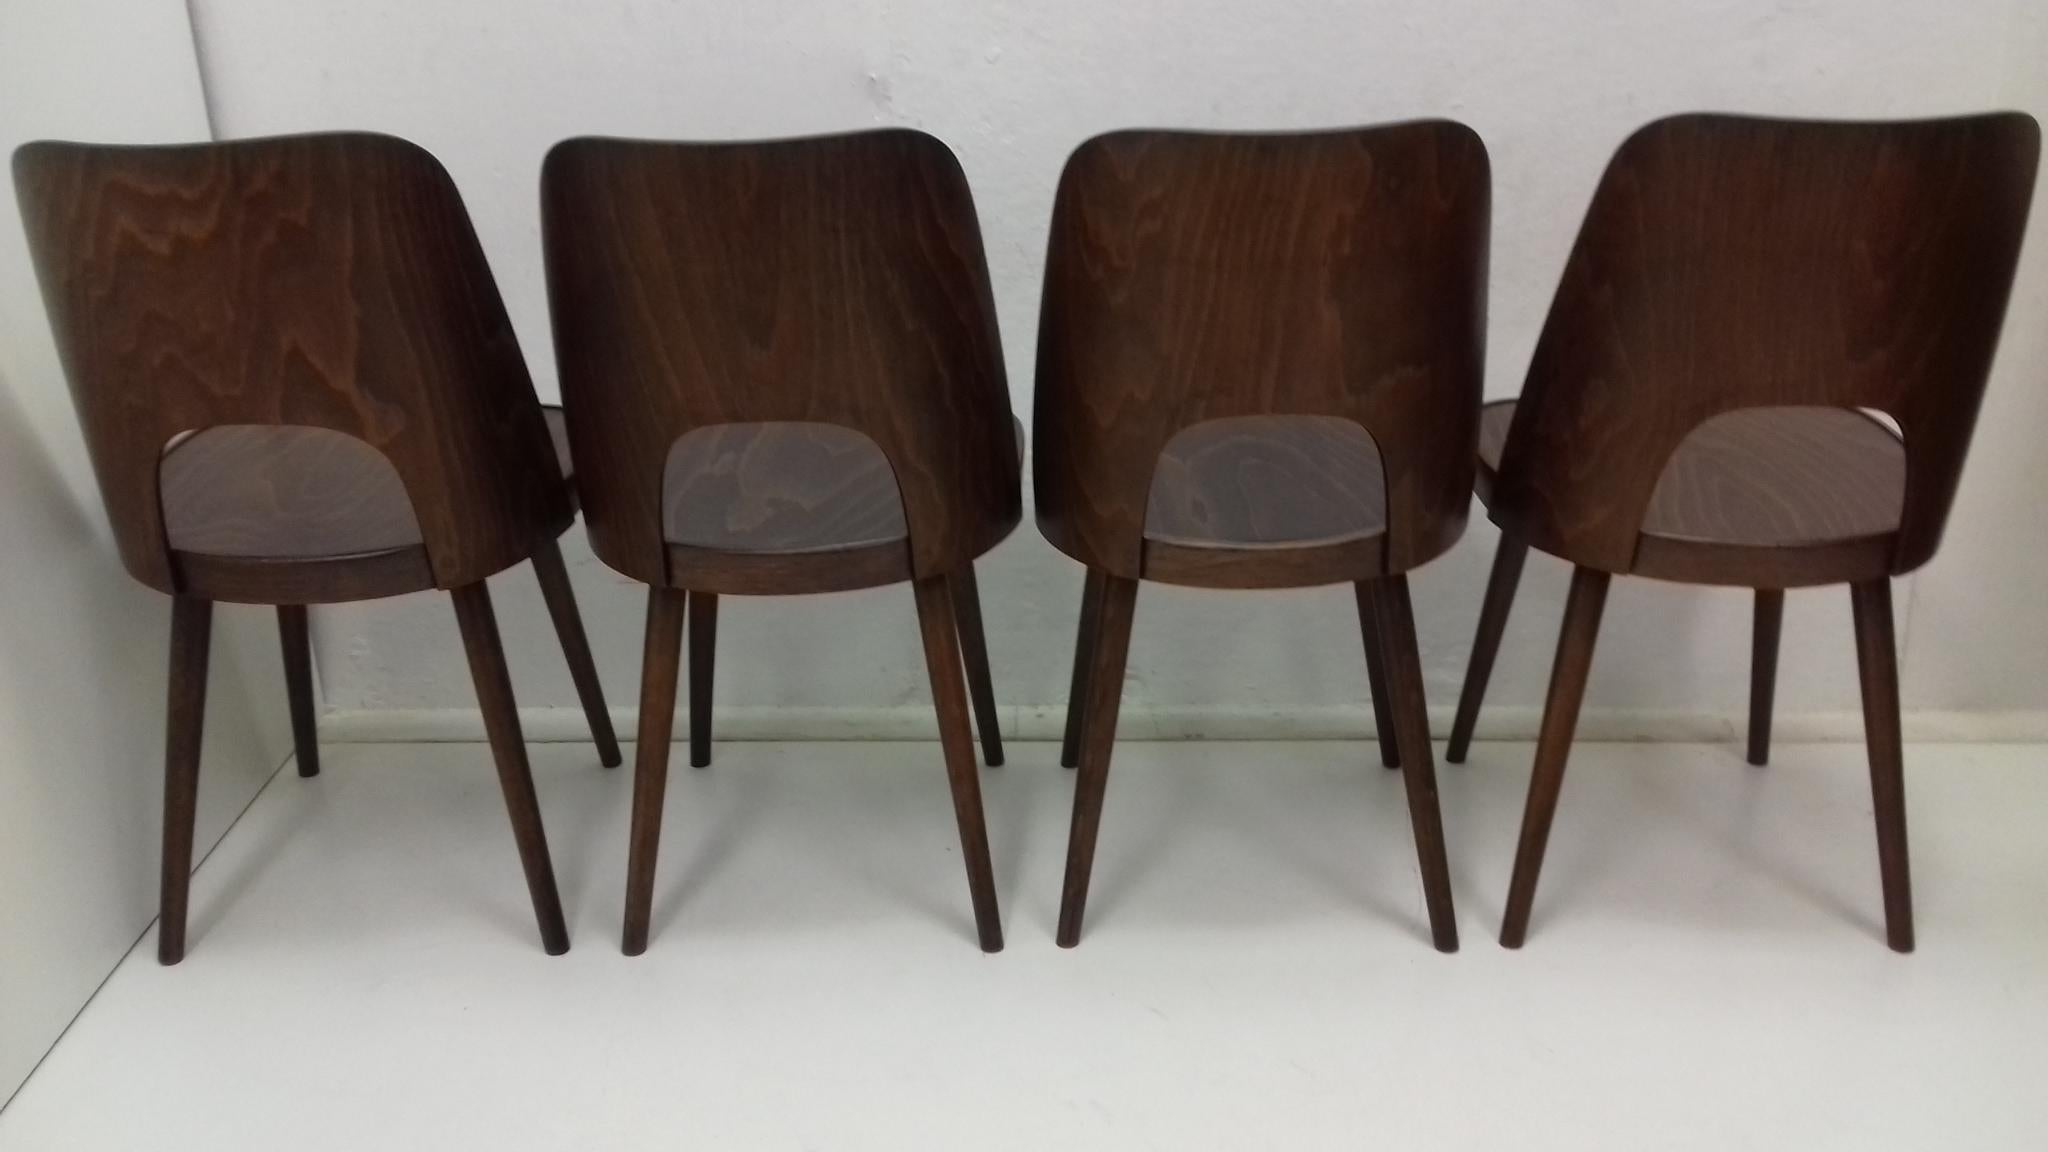 Beech Set of Four Wooden Chairs Designed by Oswald Haerdtl, 1950s For Sale